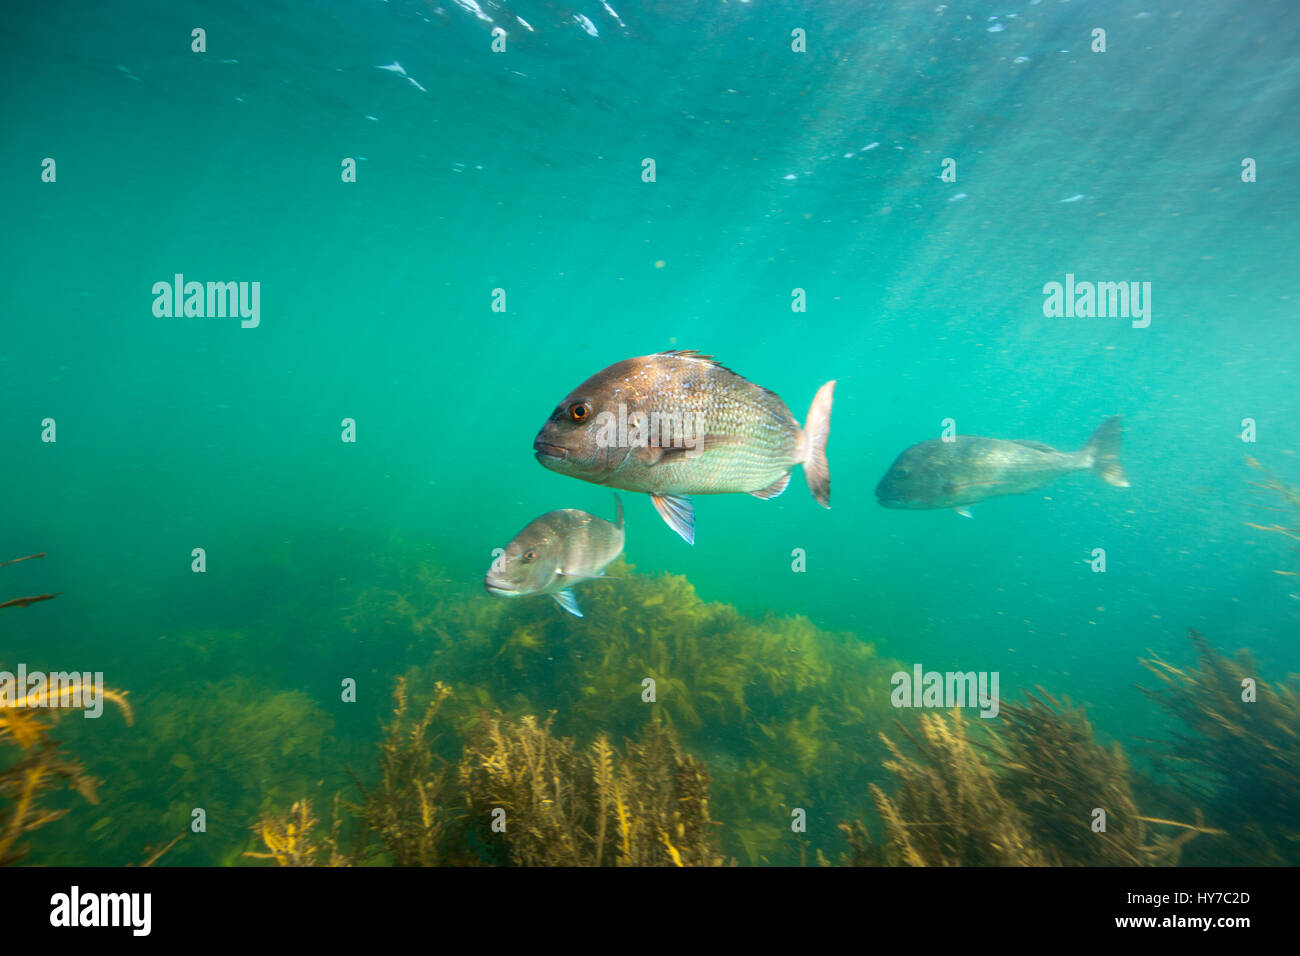 Snapper fish underwater swimming over kelp forest at Goat Island, New Zealand Stock Photo